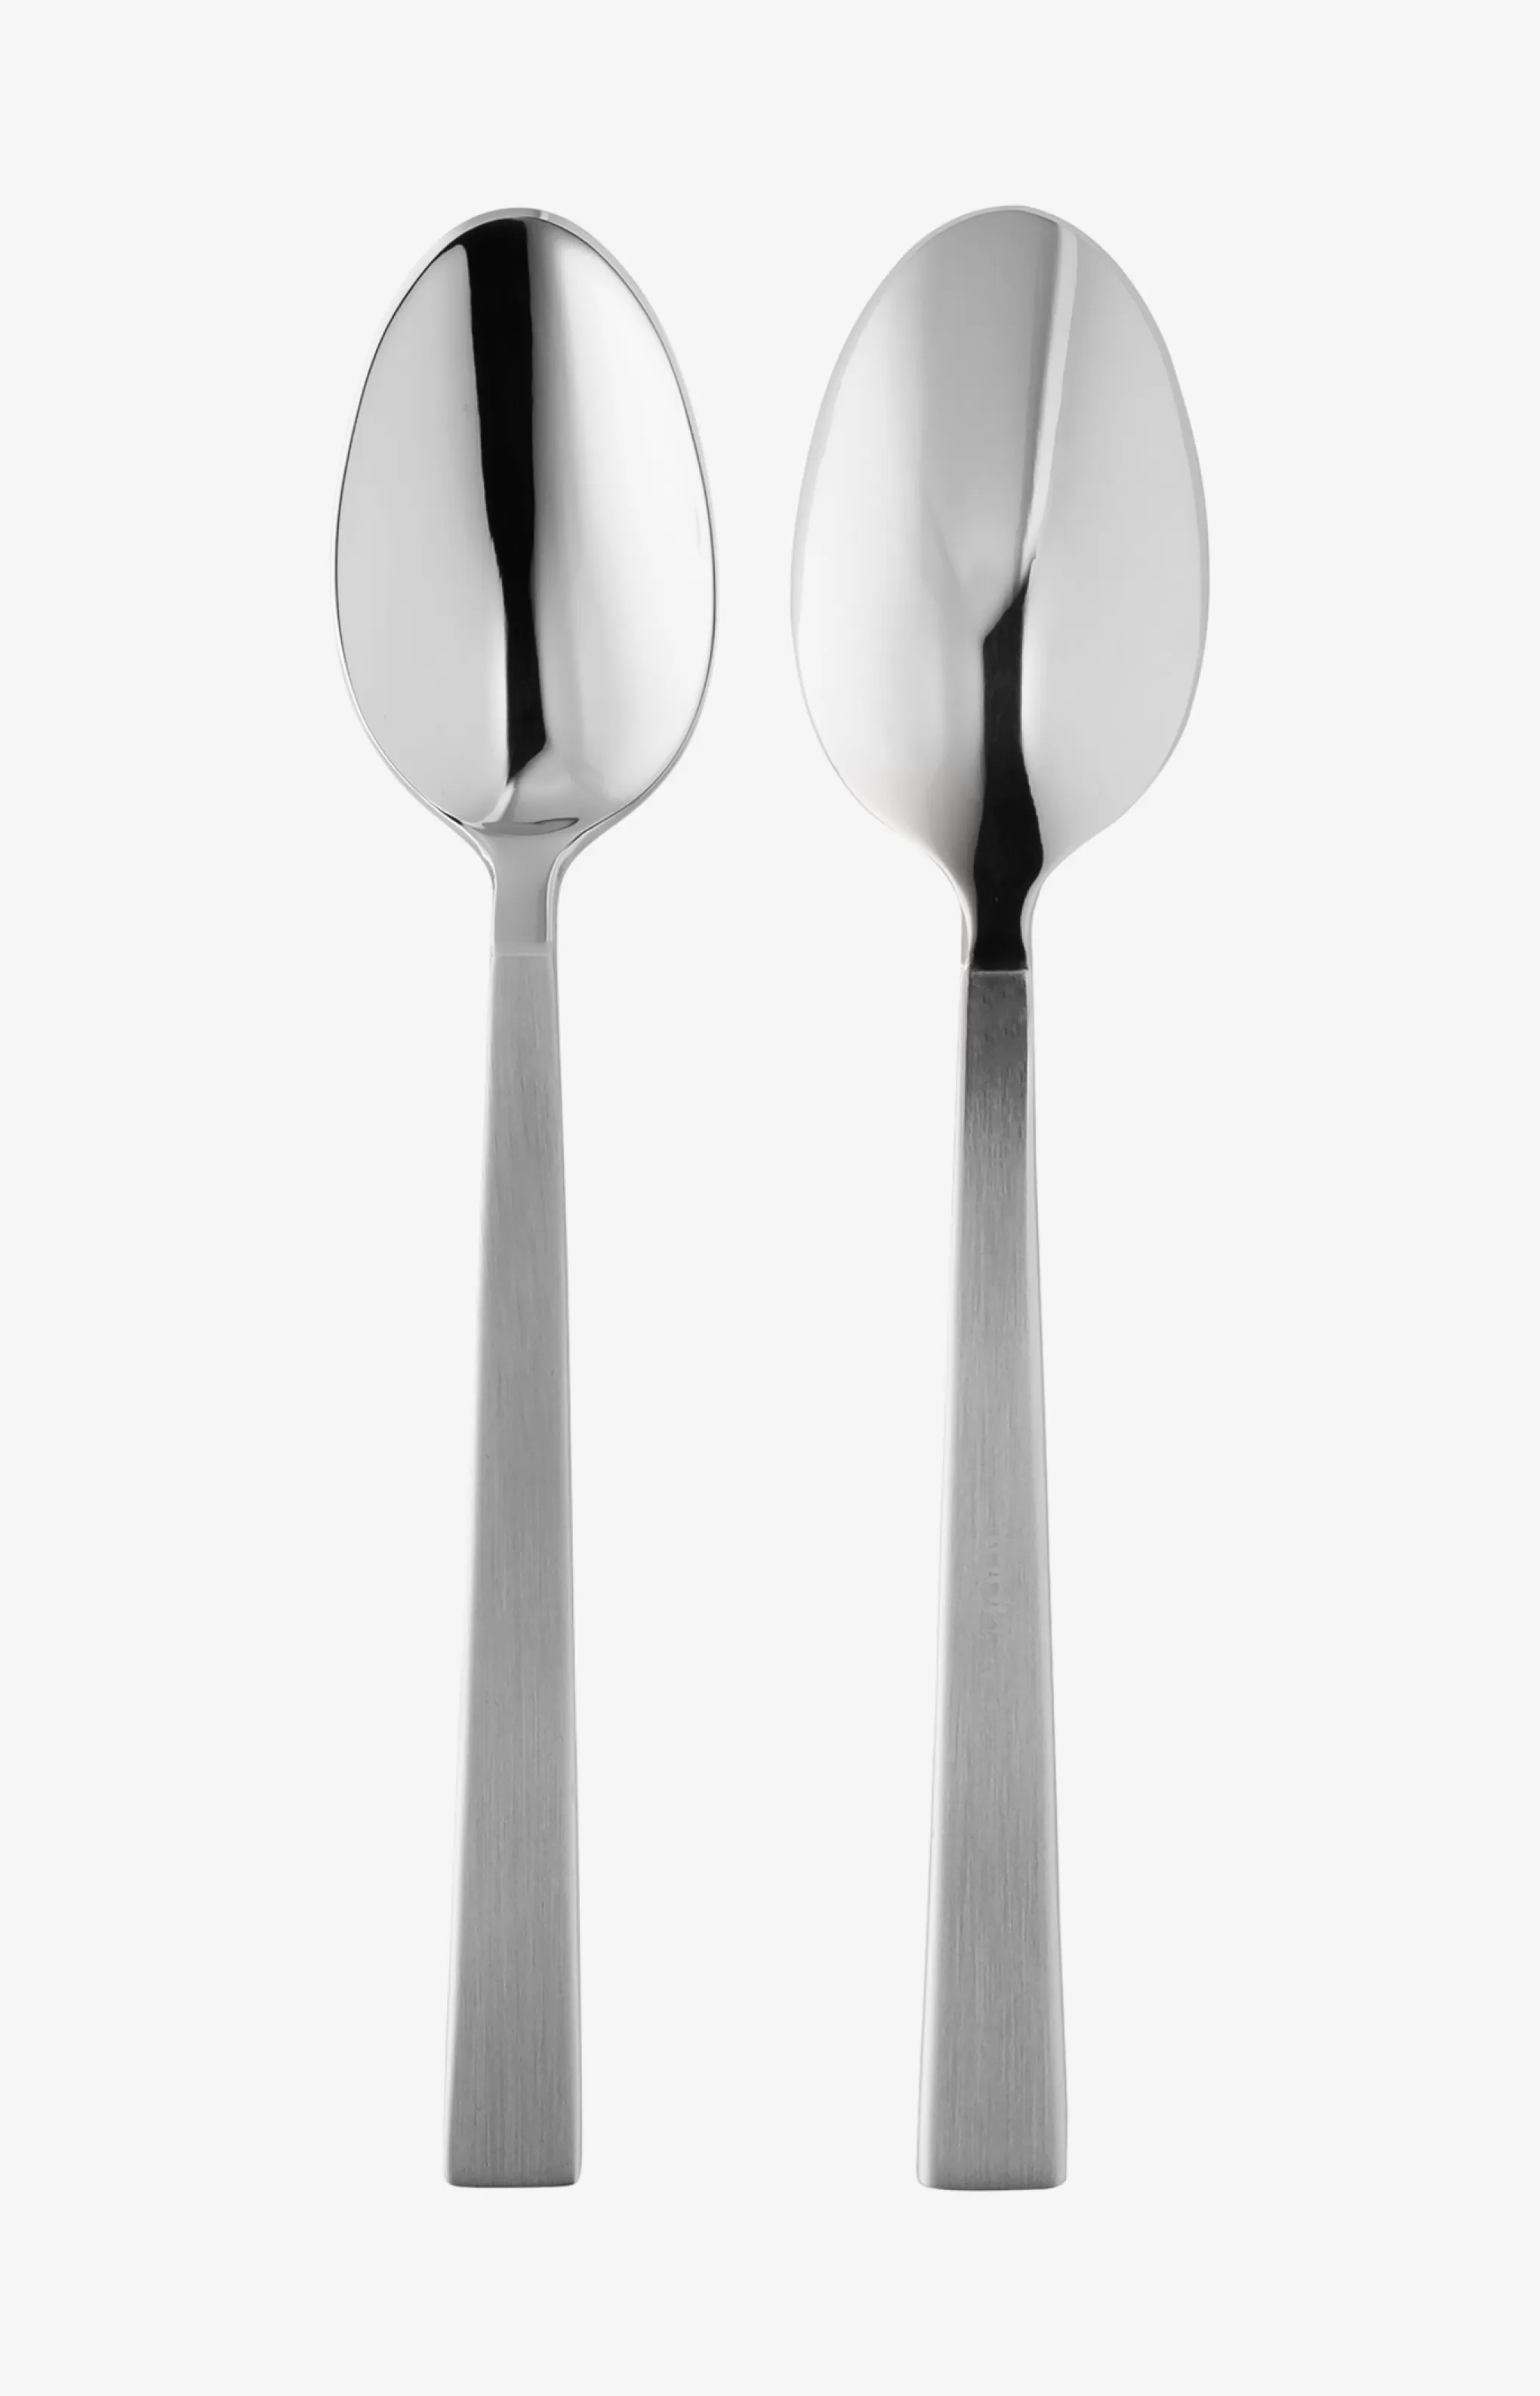 Cutlery | Discover Everything*JOOP Cutlery | Discover Everything Dining Glamour Espresso Spoons - Set of 6 in Satin Look